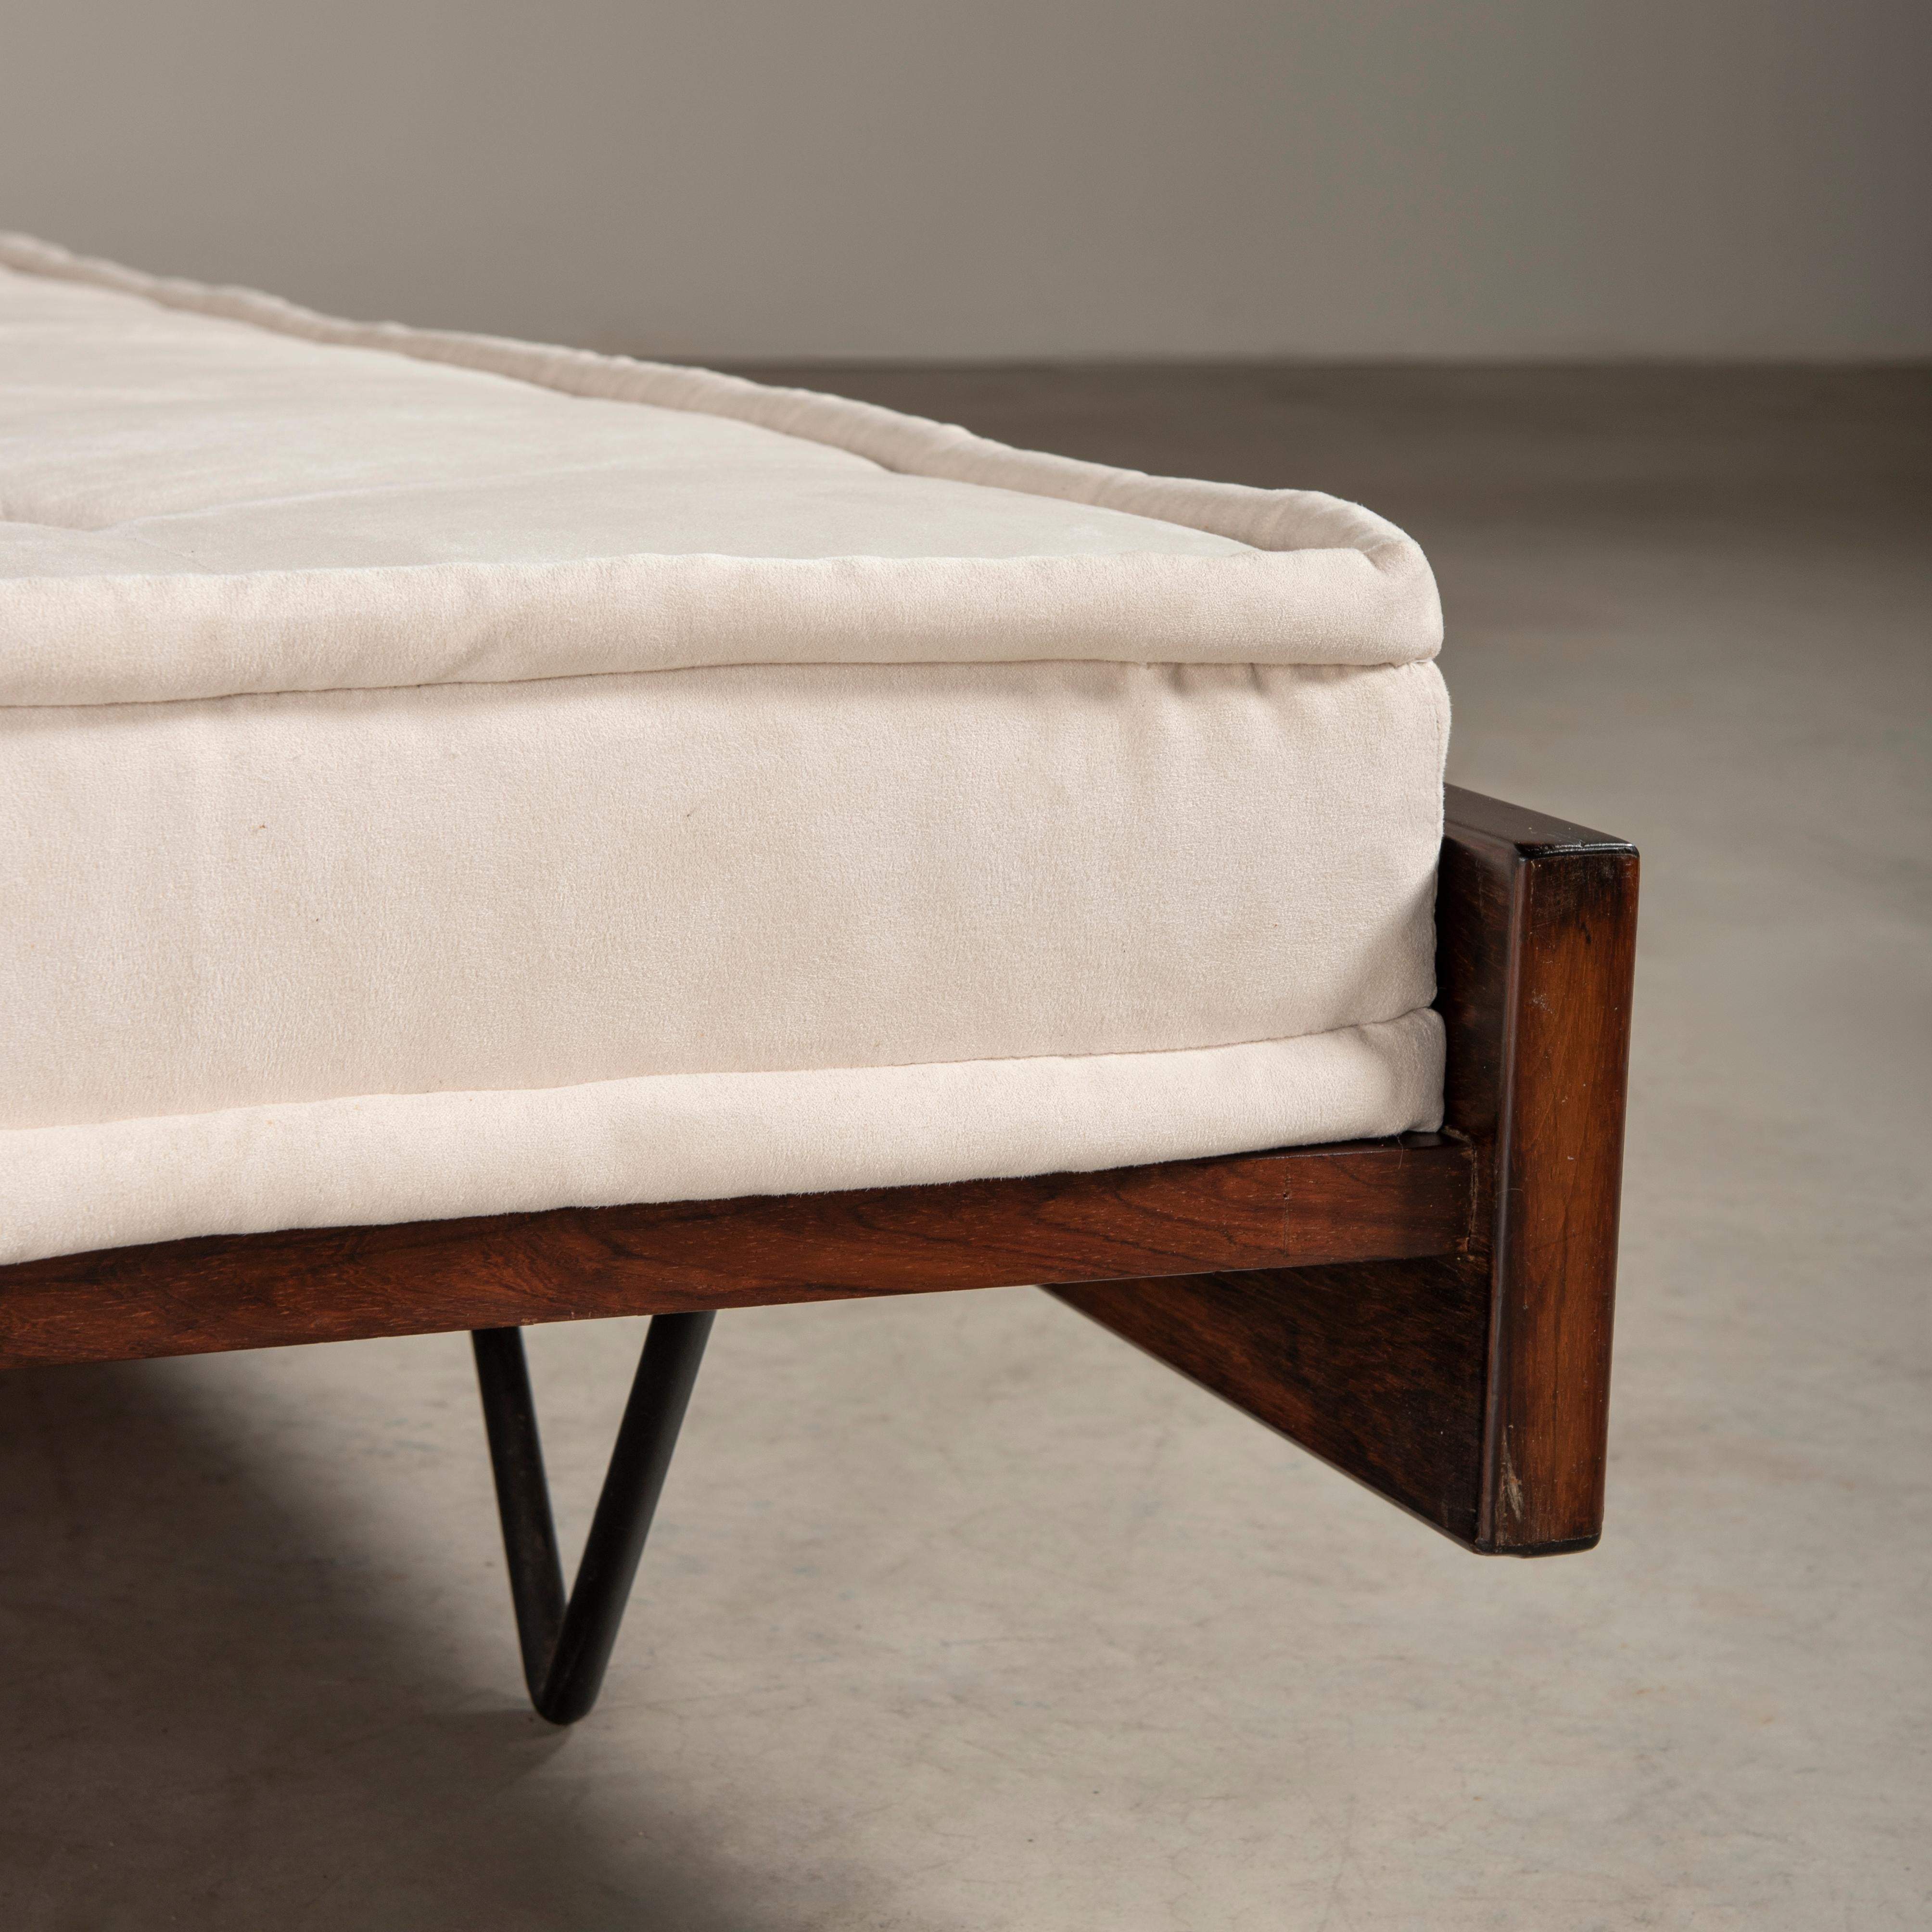 Fabric Daybed in Tropical Hardwood and Iron, Jorge Zalszupin, Brazilian Modern Design For Sale